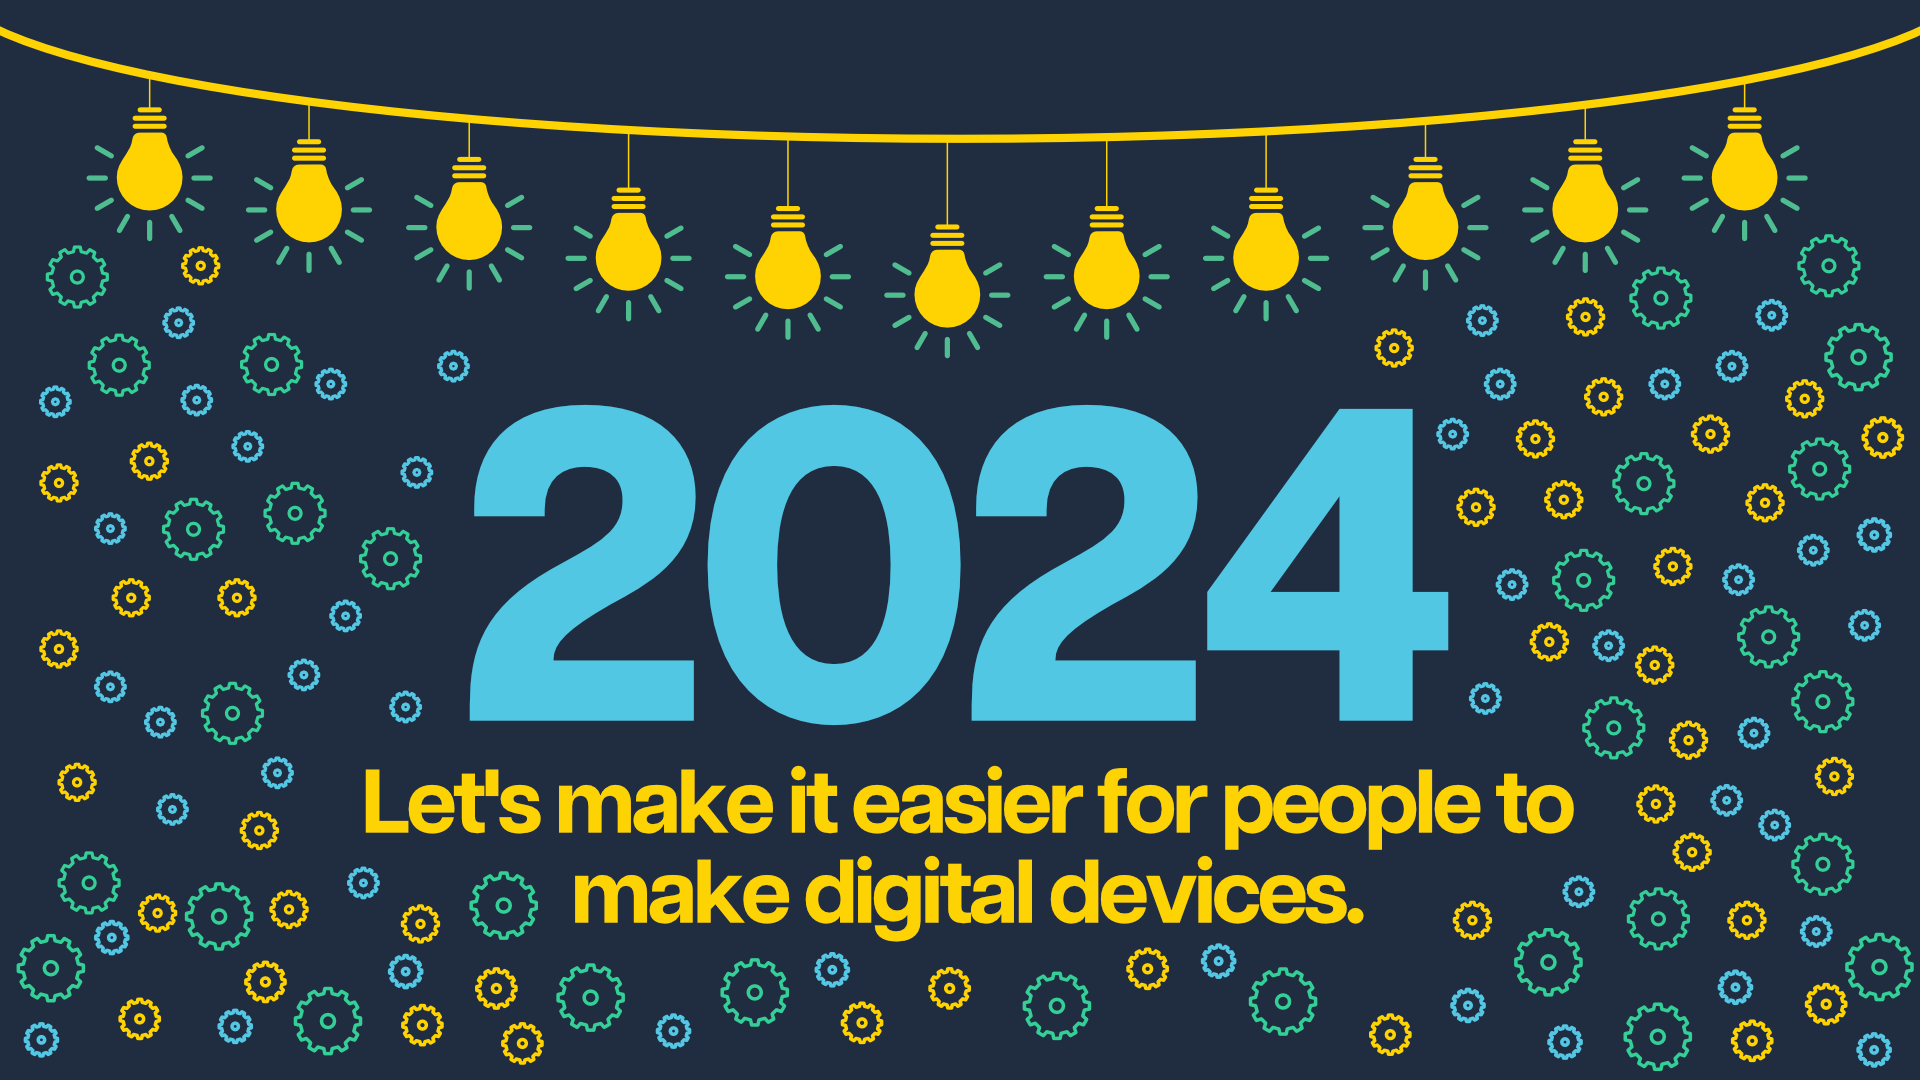 A string of yellow lightbulbs hangs above the text '2024, Let's make it easier for people to make digital devices' against a navy background covered in small blue and yellow gears.